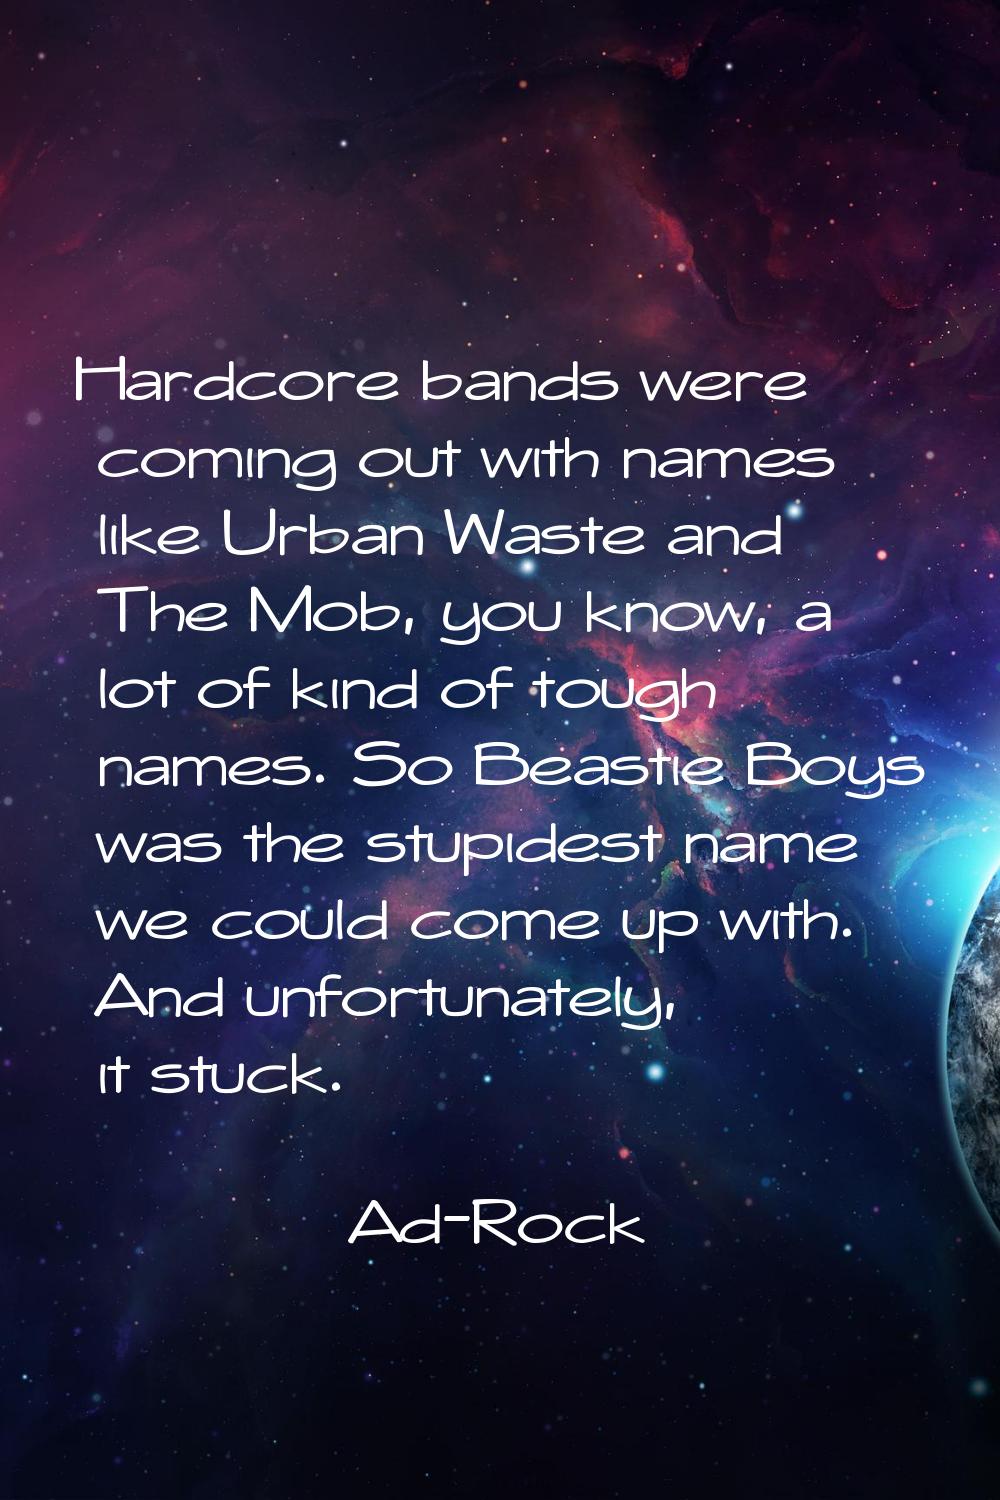 Hardcore bands were coming out with names like Urban Waste and The Mob, you know, a lot of kind of 